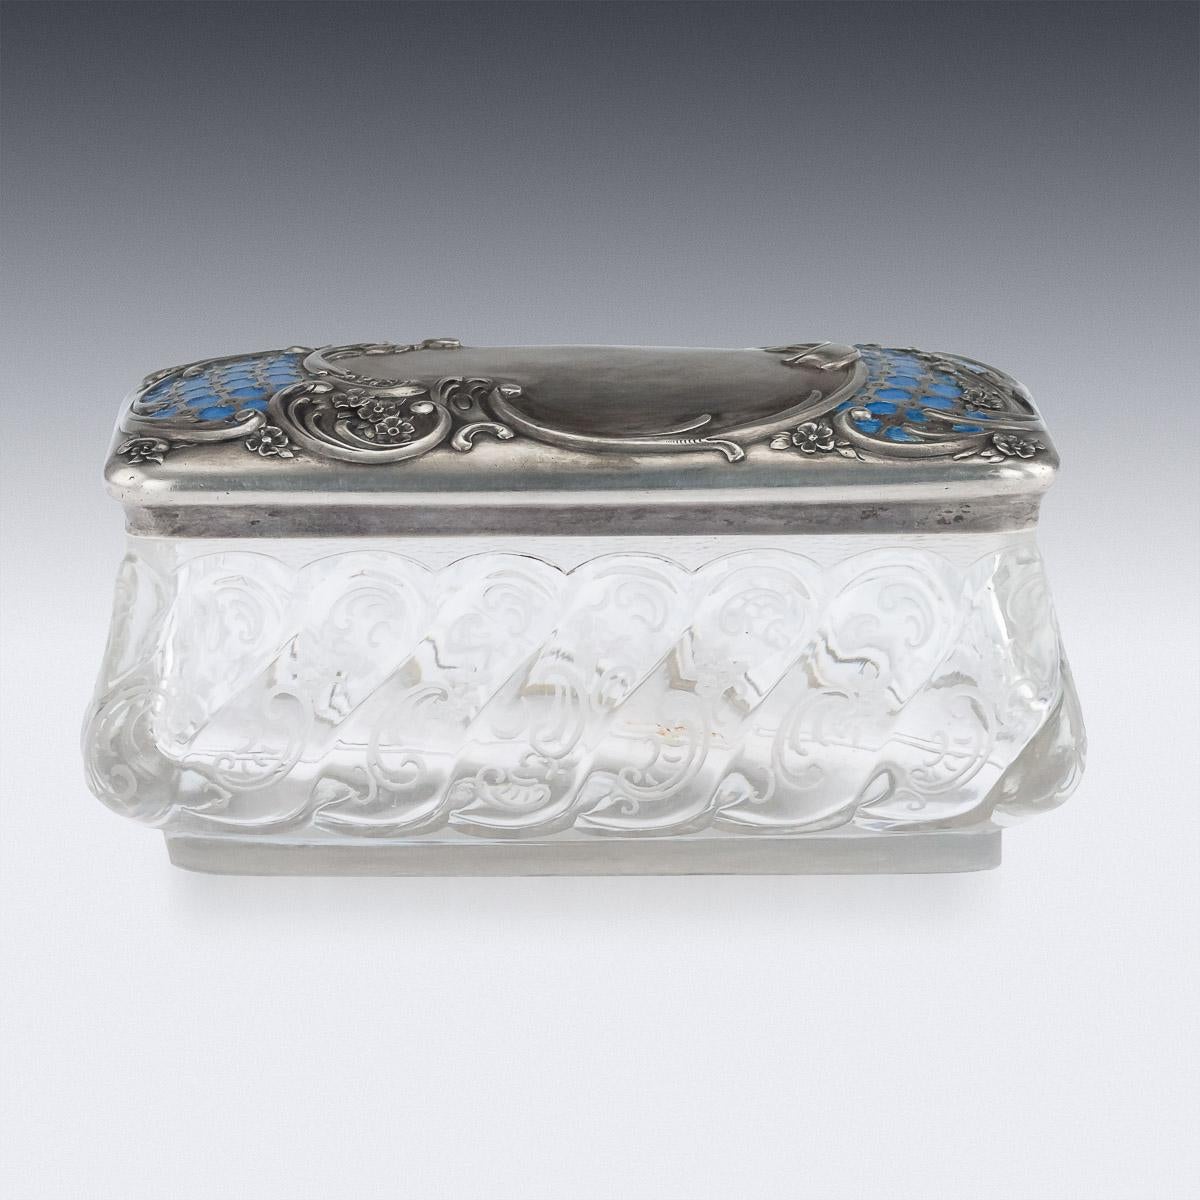 Antique early 20th century Russian Faberge enameled solid silver and rock crystal vanity box, the rectangular Rococo style lid, elaborate in design with scrolls and flowers, beautifully part enameled and gilded on reverse. The hand carved rock